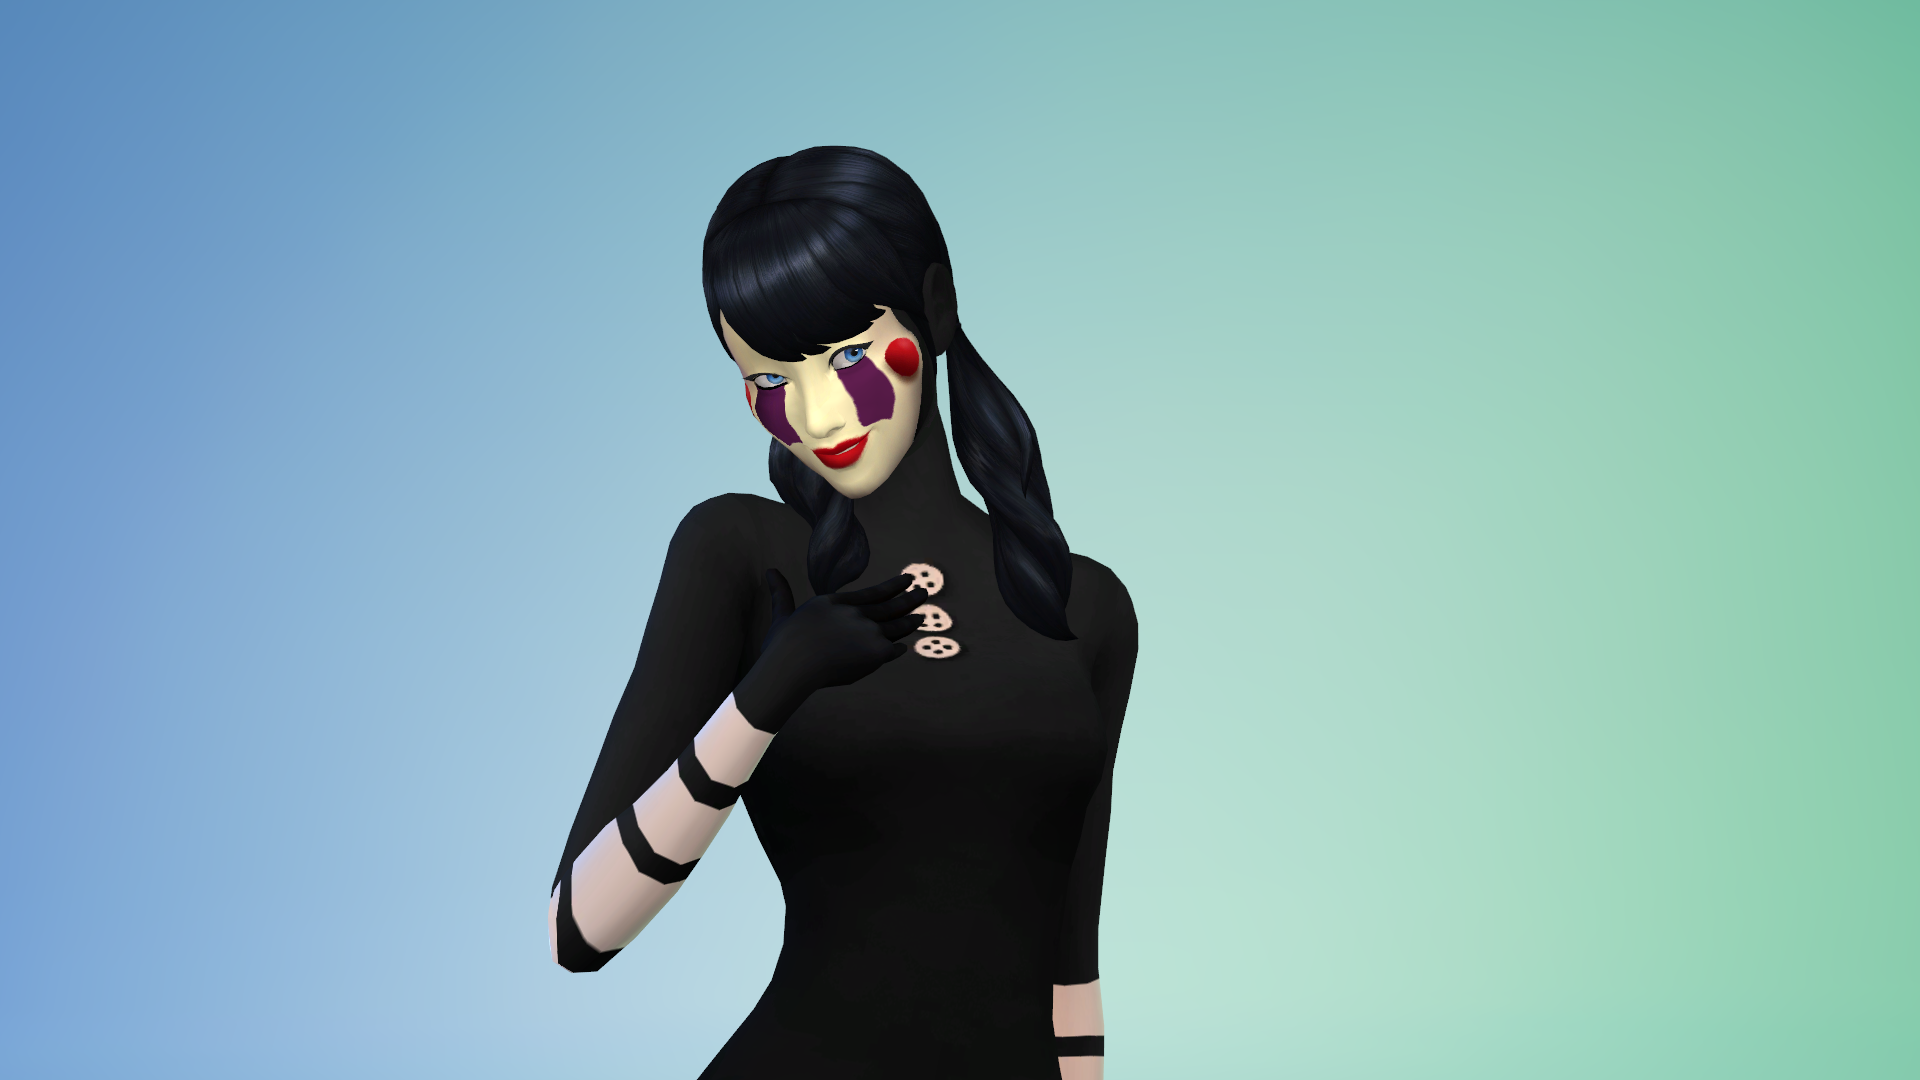 Mod The Sims - Marionette outfit - Five nights at freddys